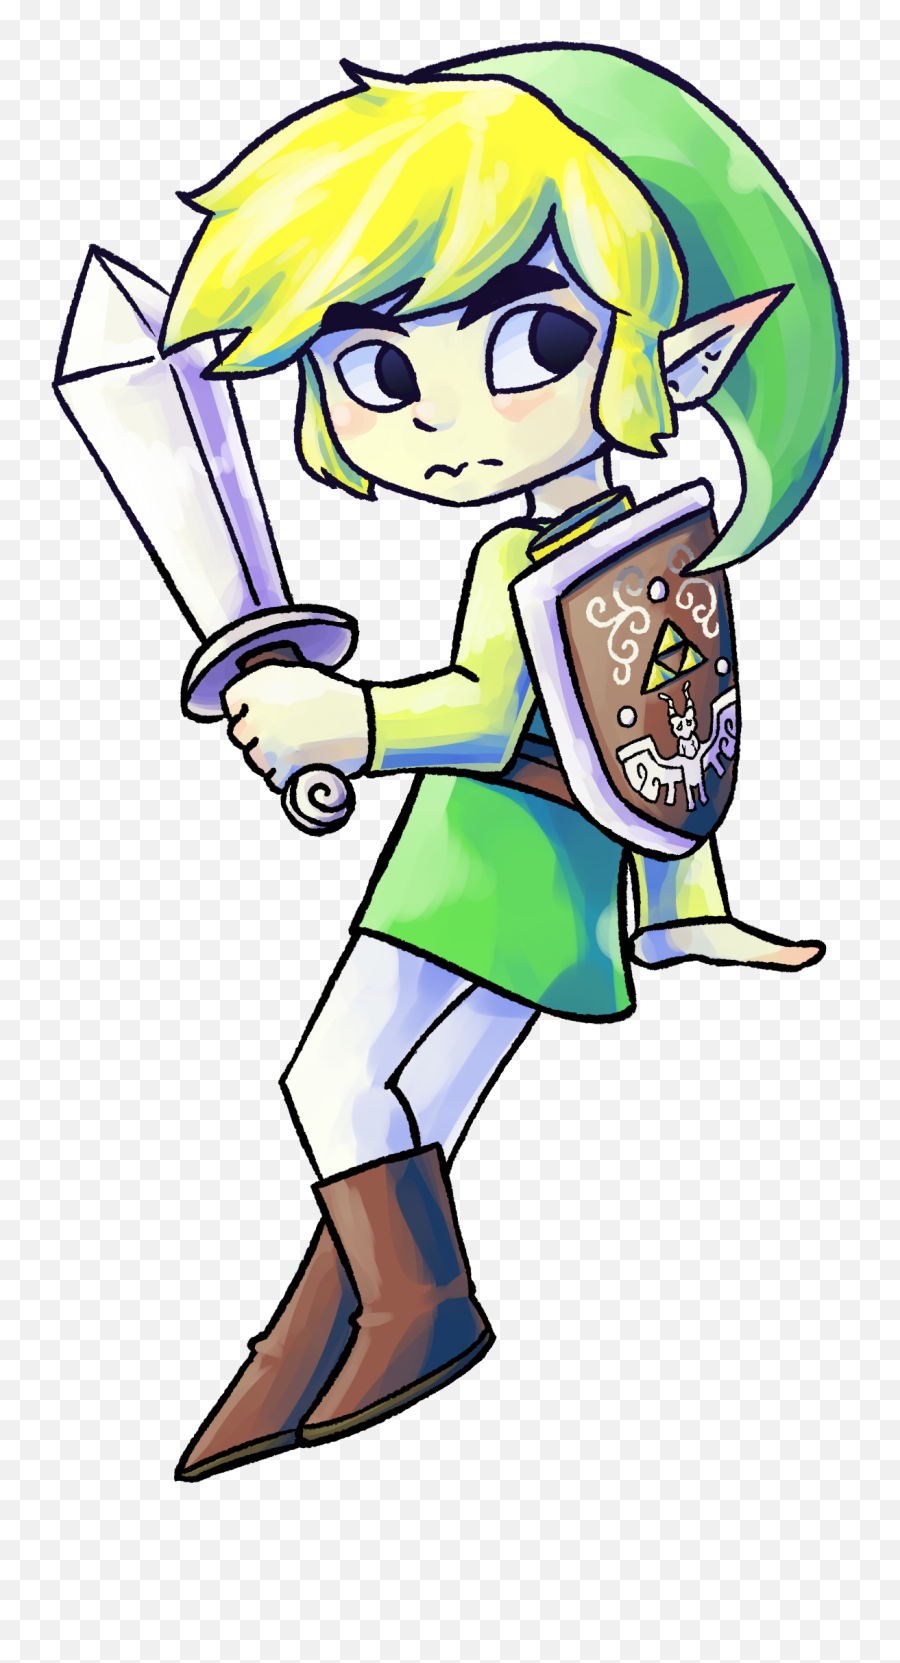 Oc Ww I Drew Toon Link From Specifically Zelda - Fictional Character Png,Toon Link Transparent